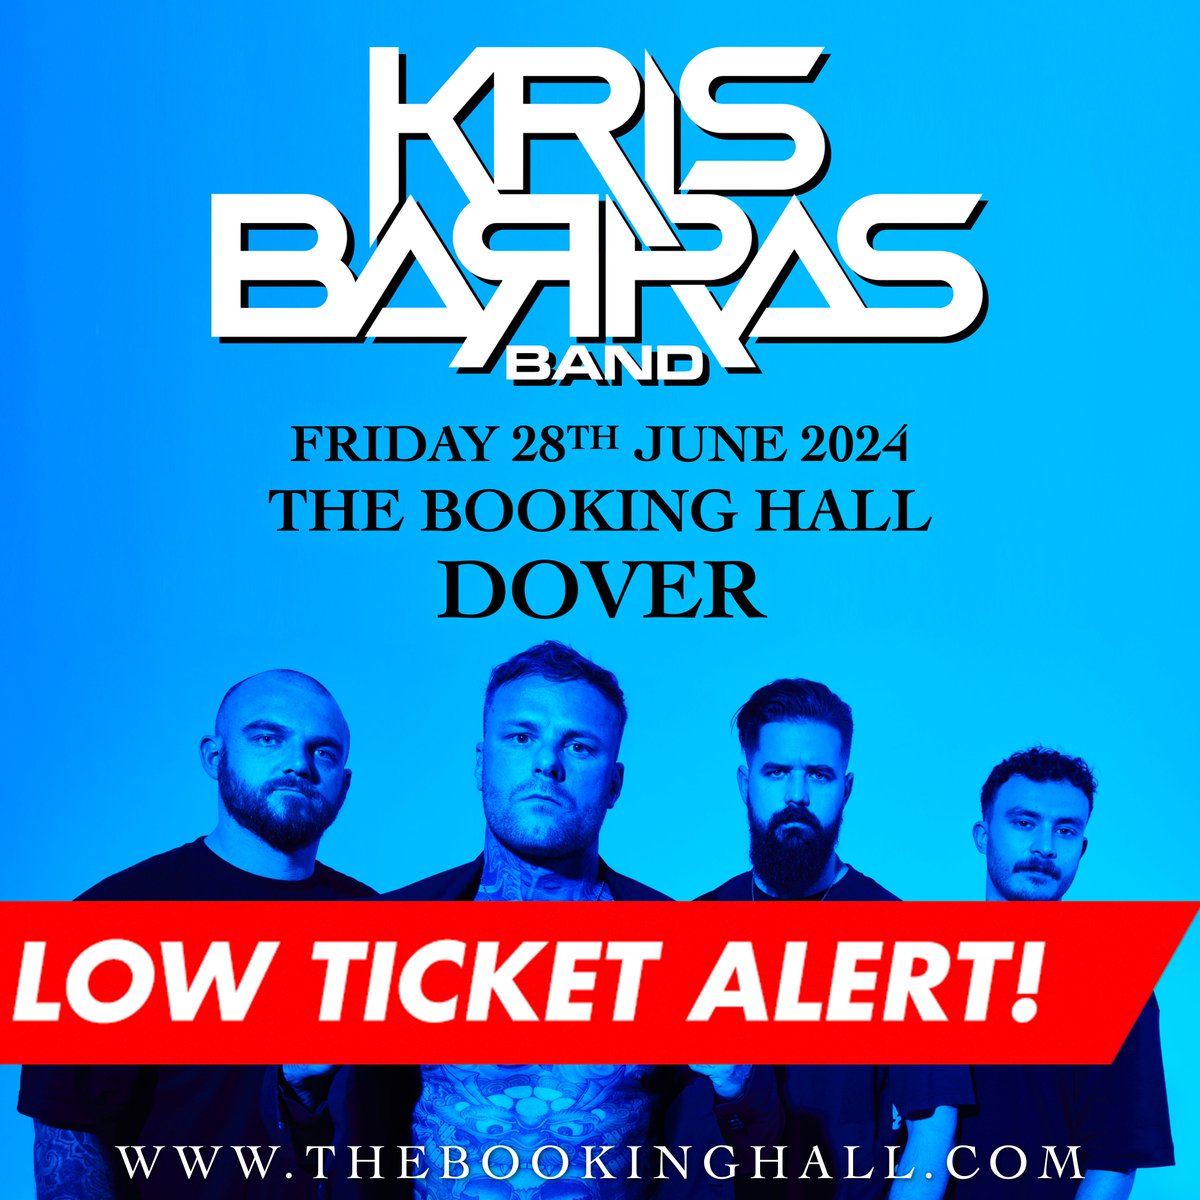 HURRY! Tickets have flown out for @KrisBarrasBand Get yours before they're gone!